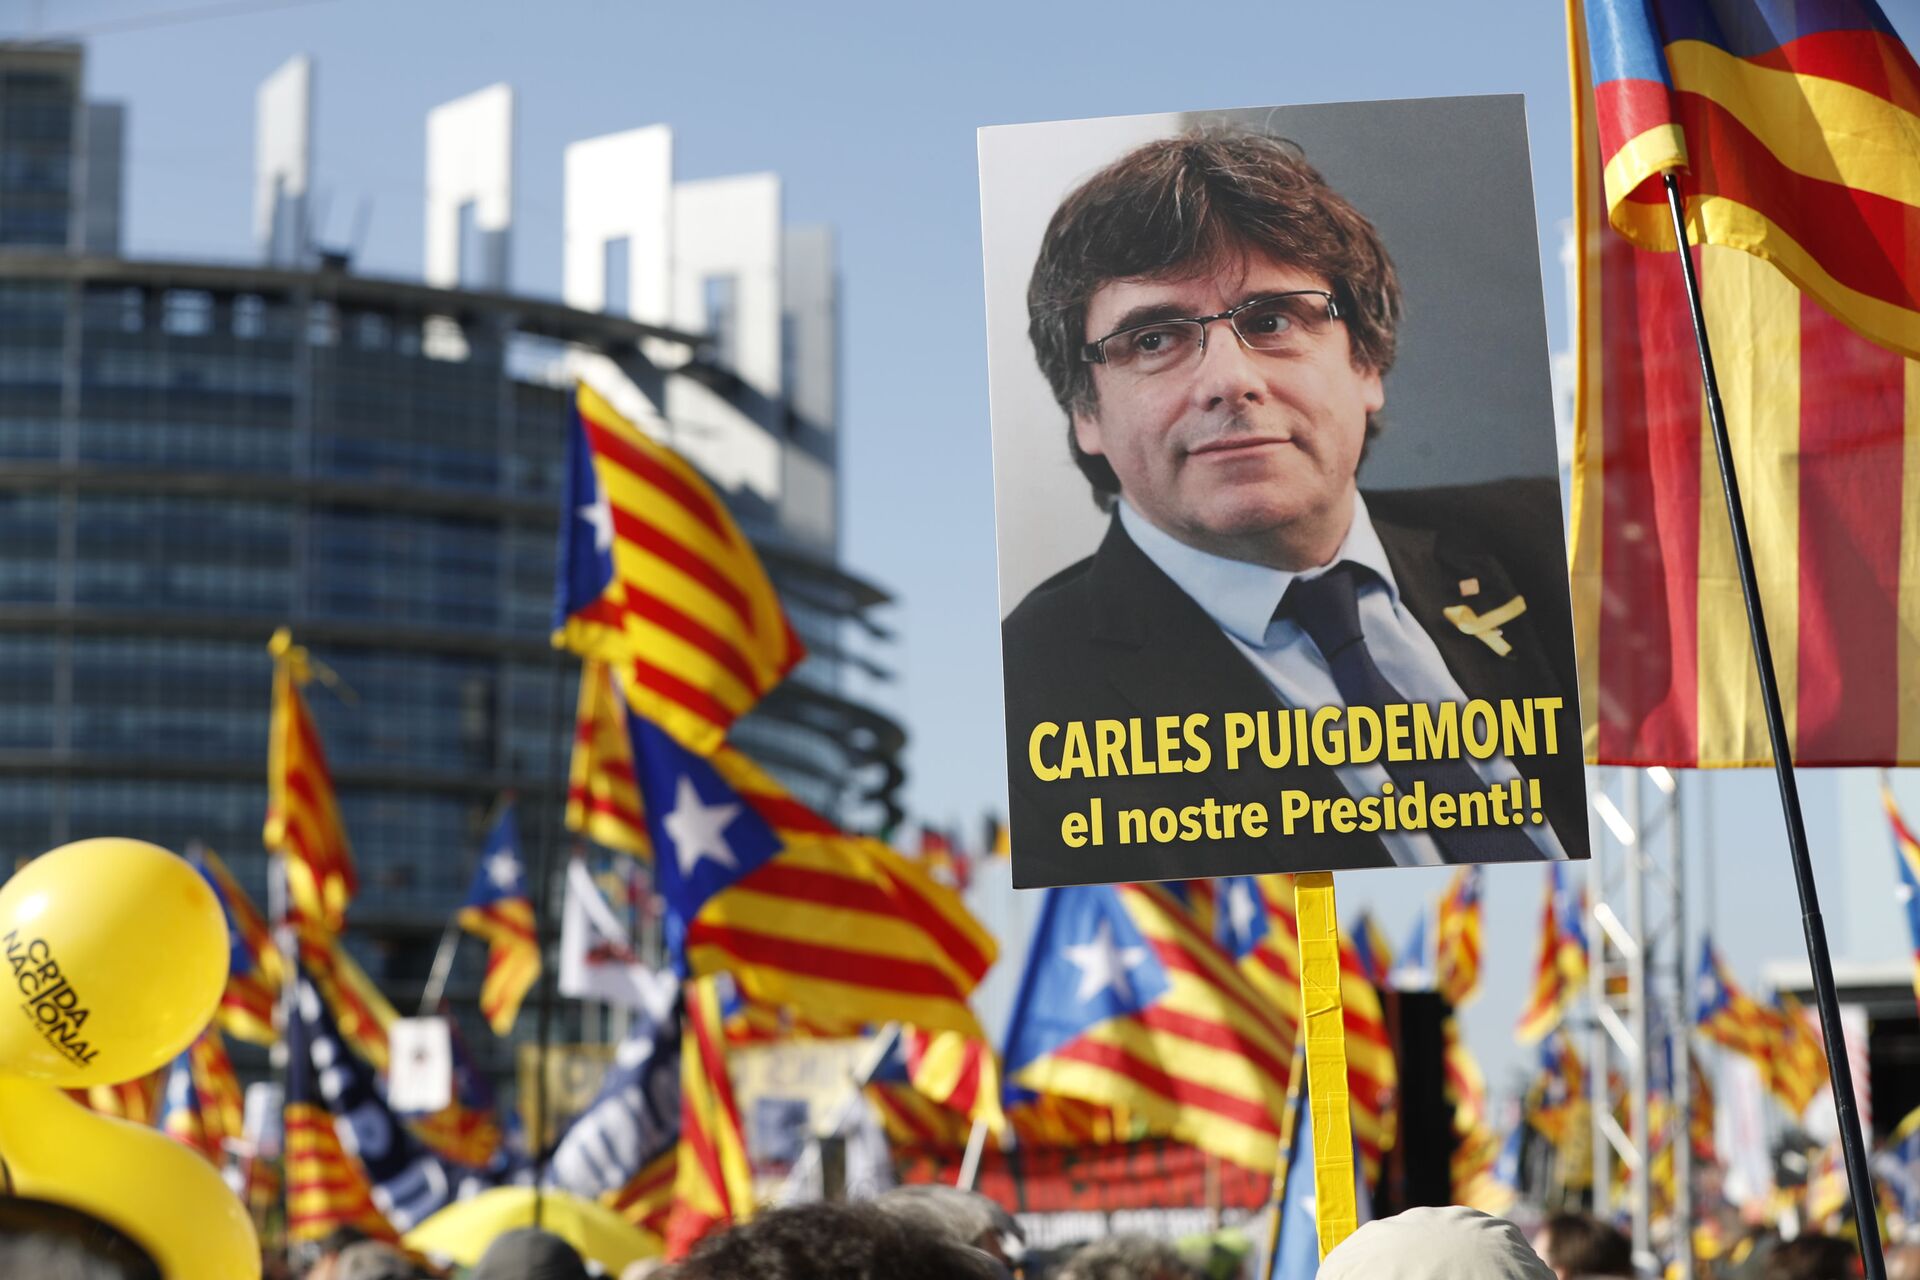 Catalan Nationalists to Be Given Controversial Pardons After Failed Bid for Independence in 2017 - Sputnik International, 1920, 21.06.2021